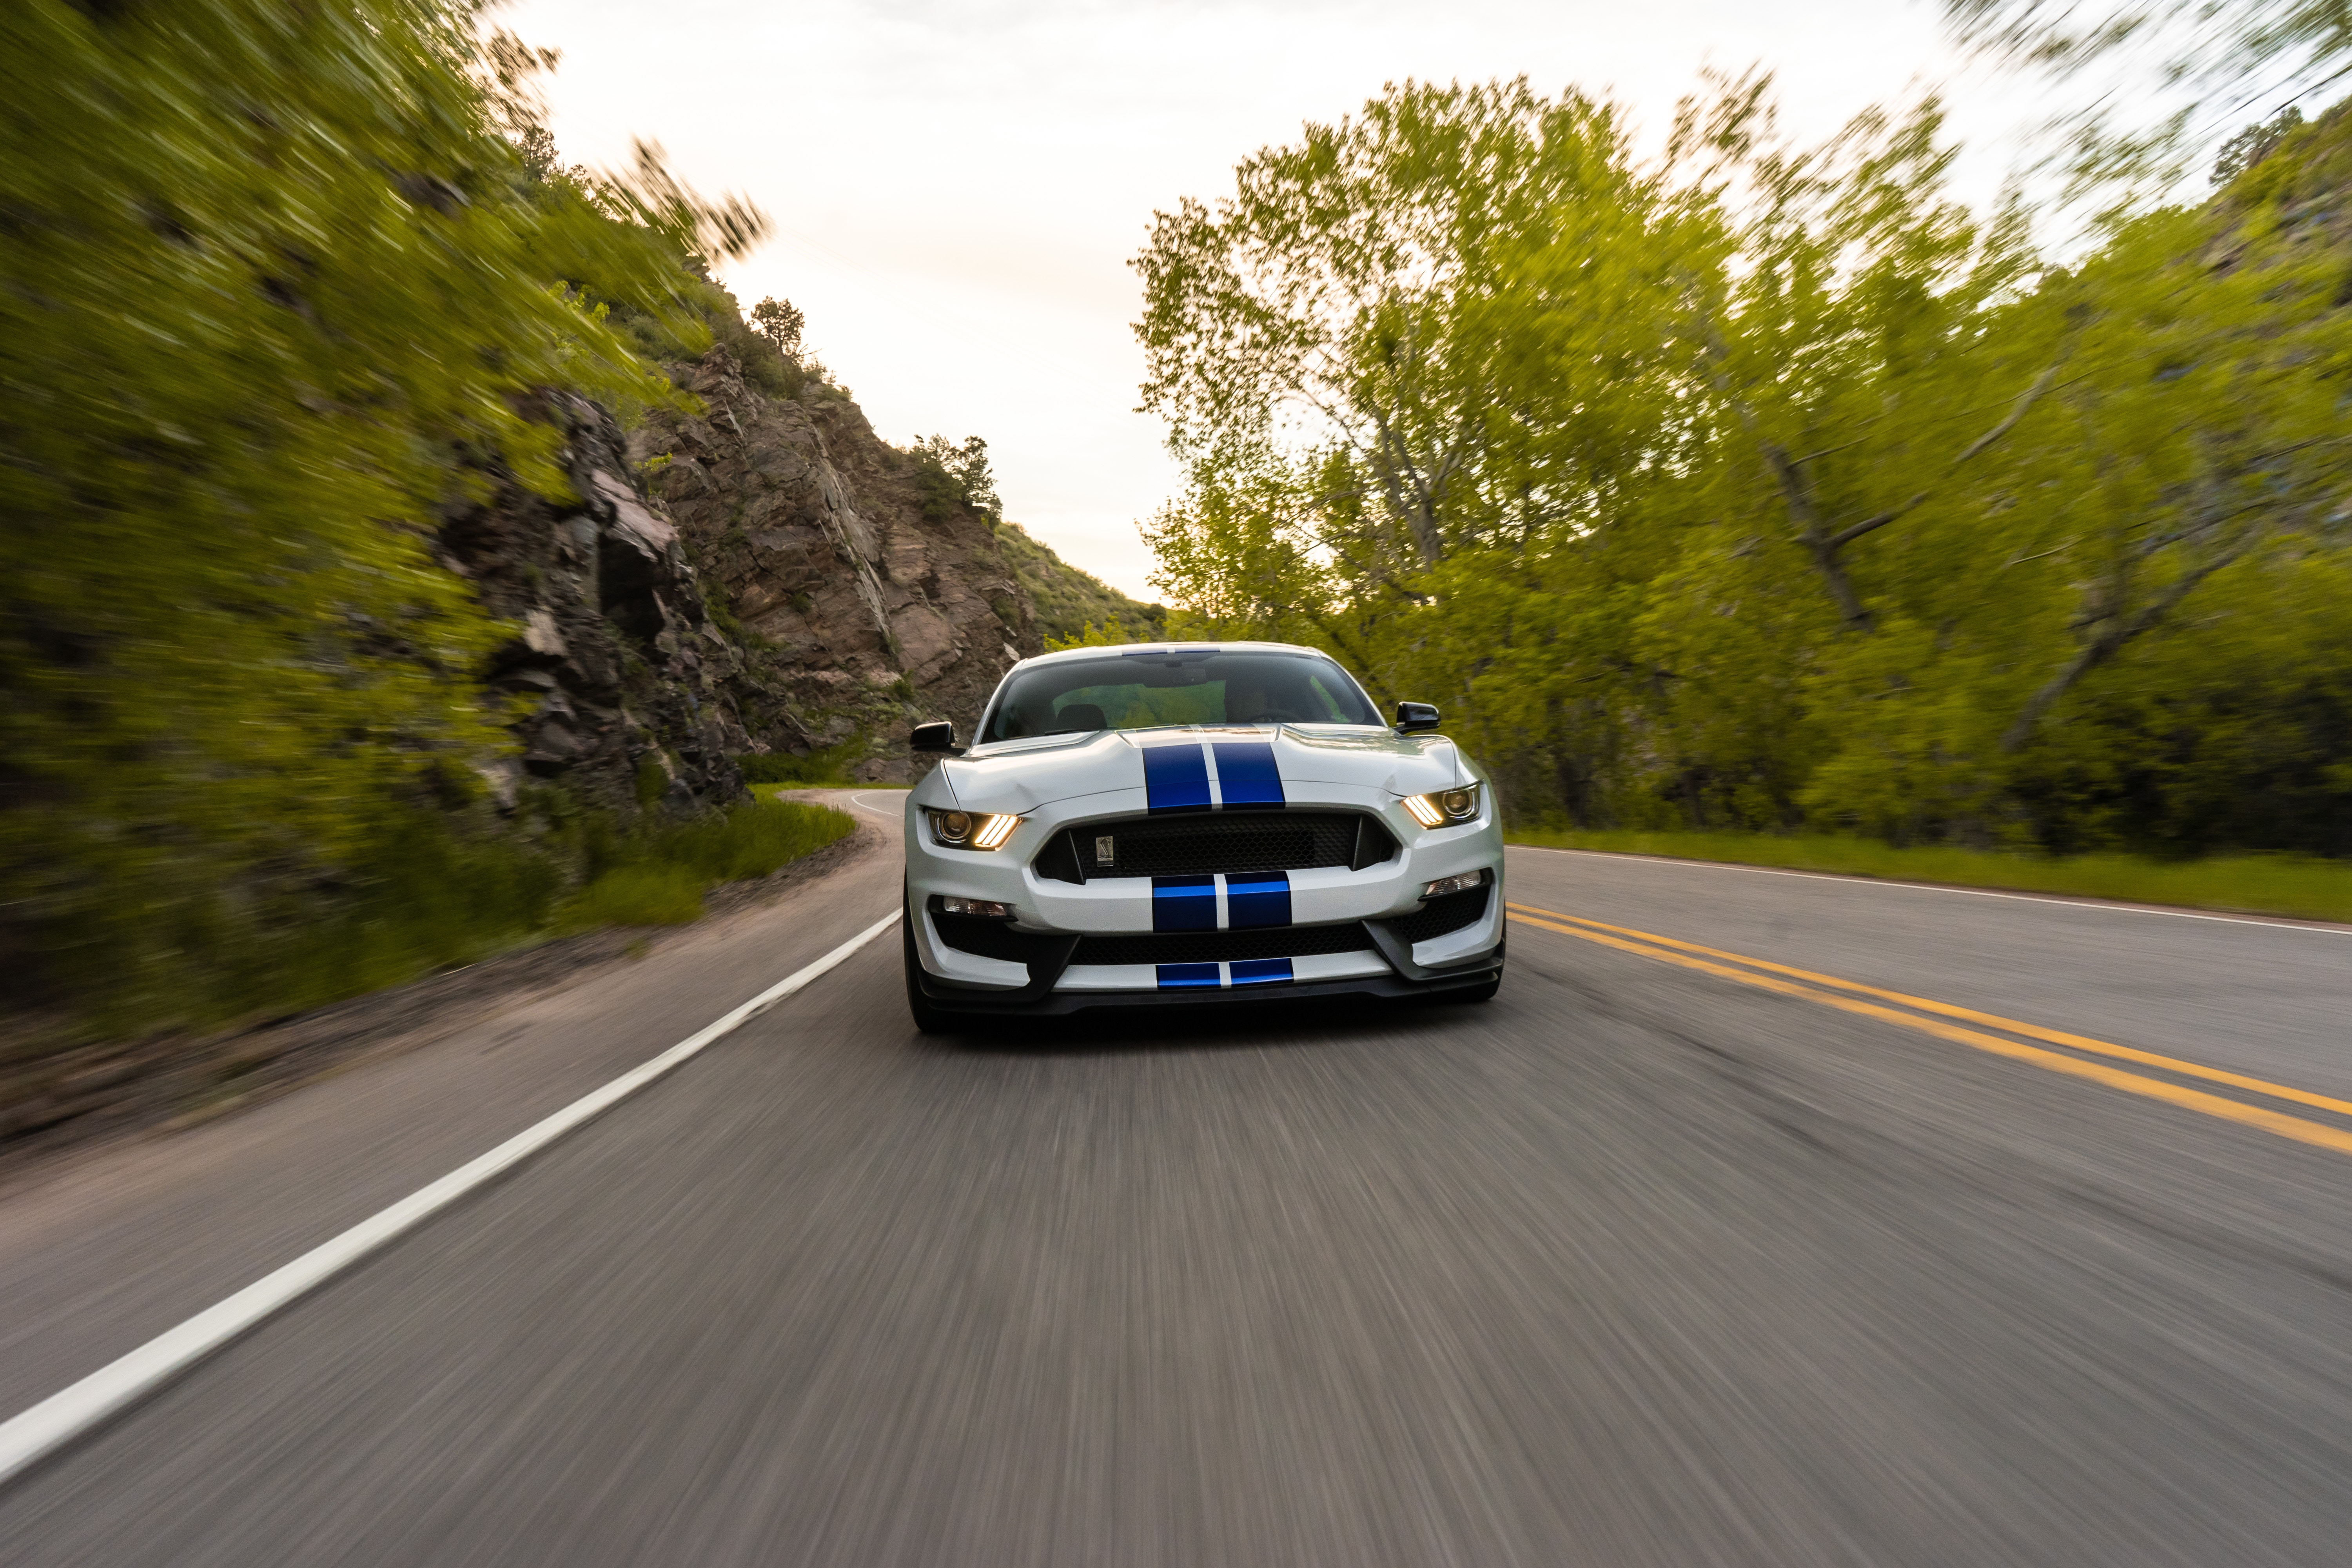 cars, sports car, ford mustang gt350, car, sports, ford, road, machine, speed Full HD